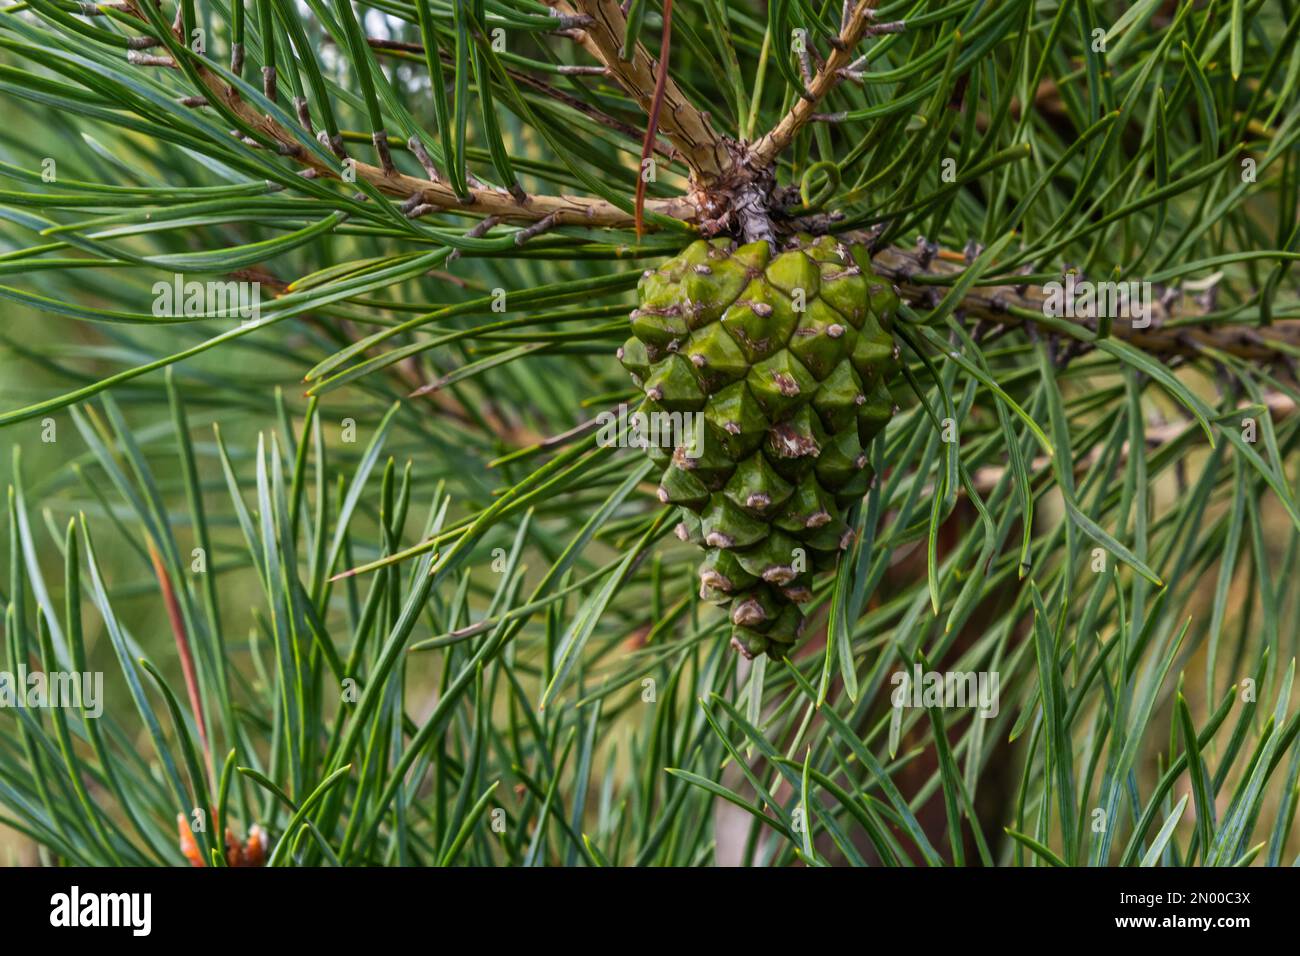 pine tree Green pine cone hanging on fir needles branch. Medicinal plant. Stock Photo